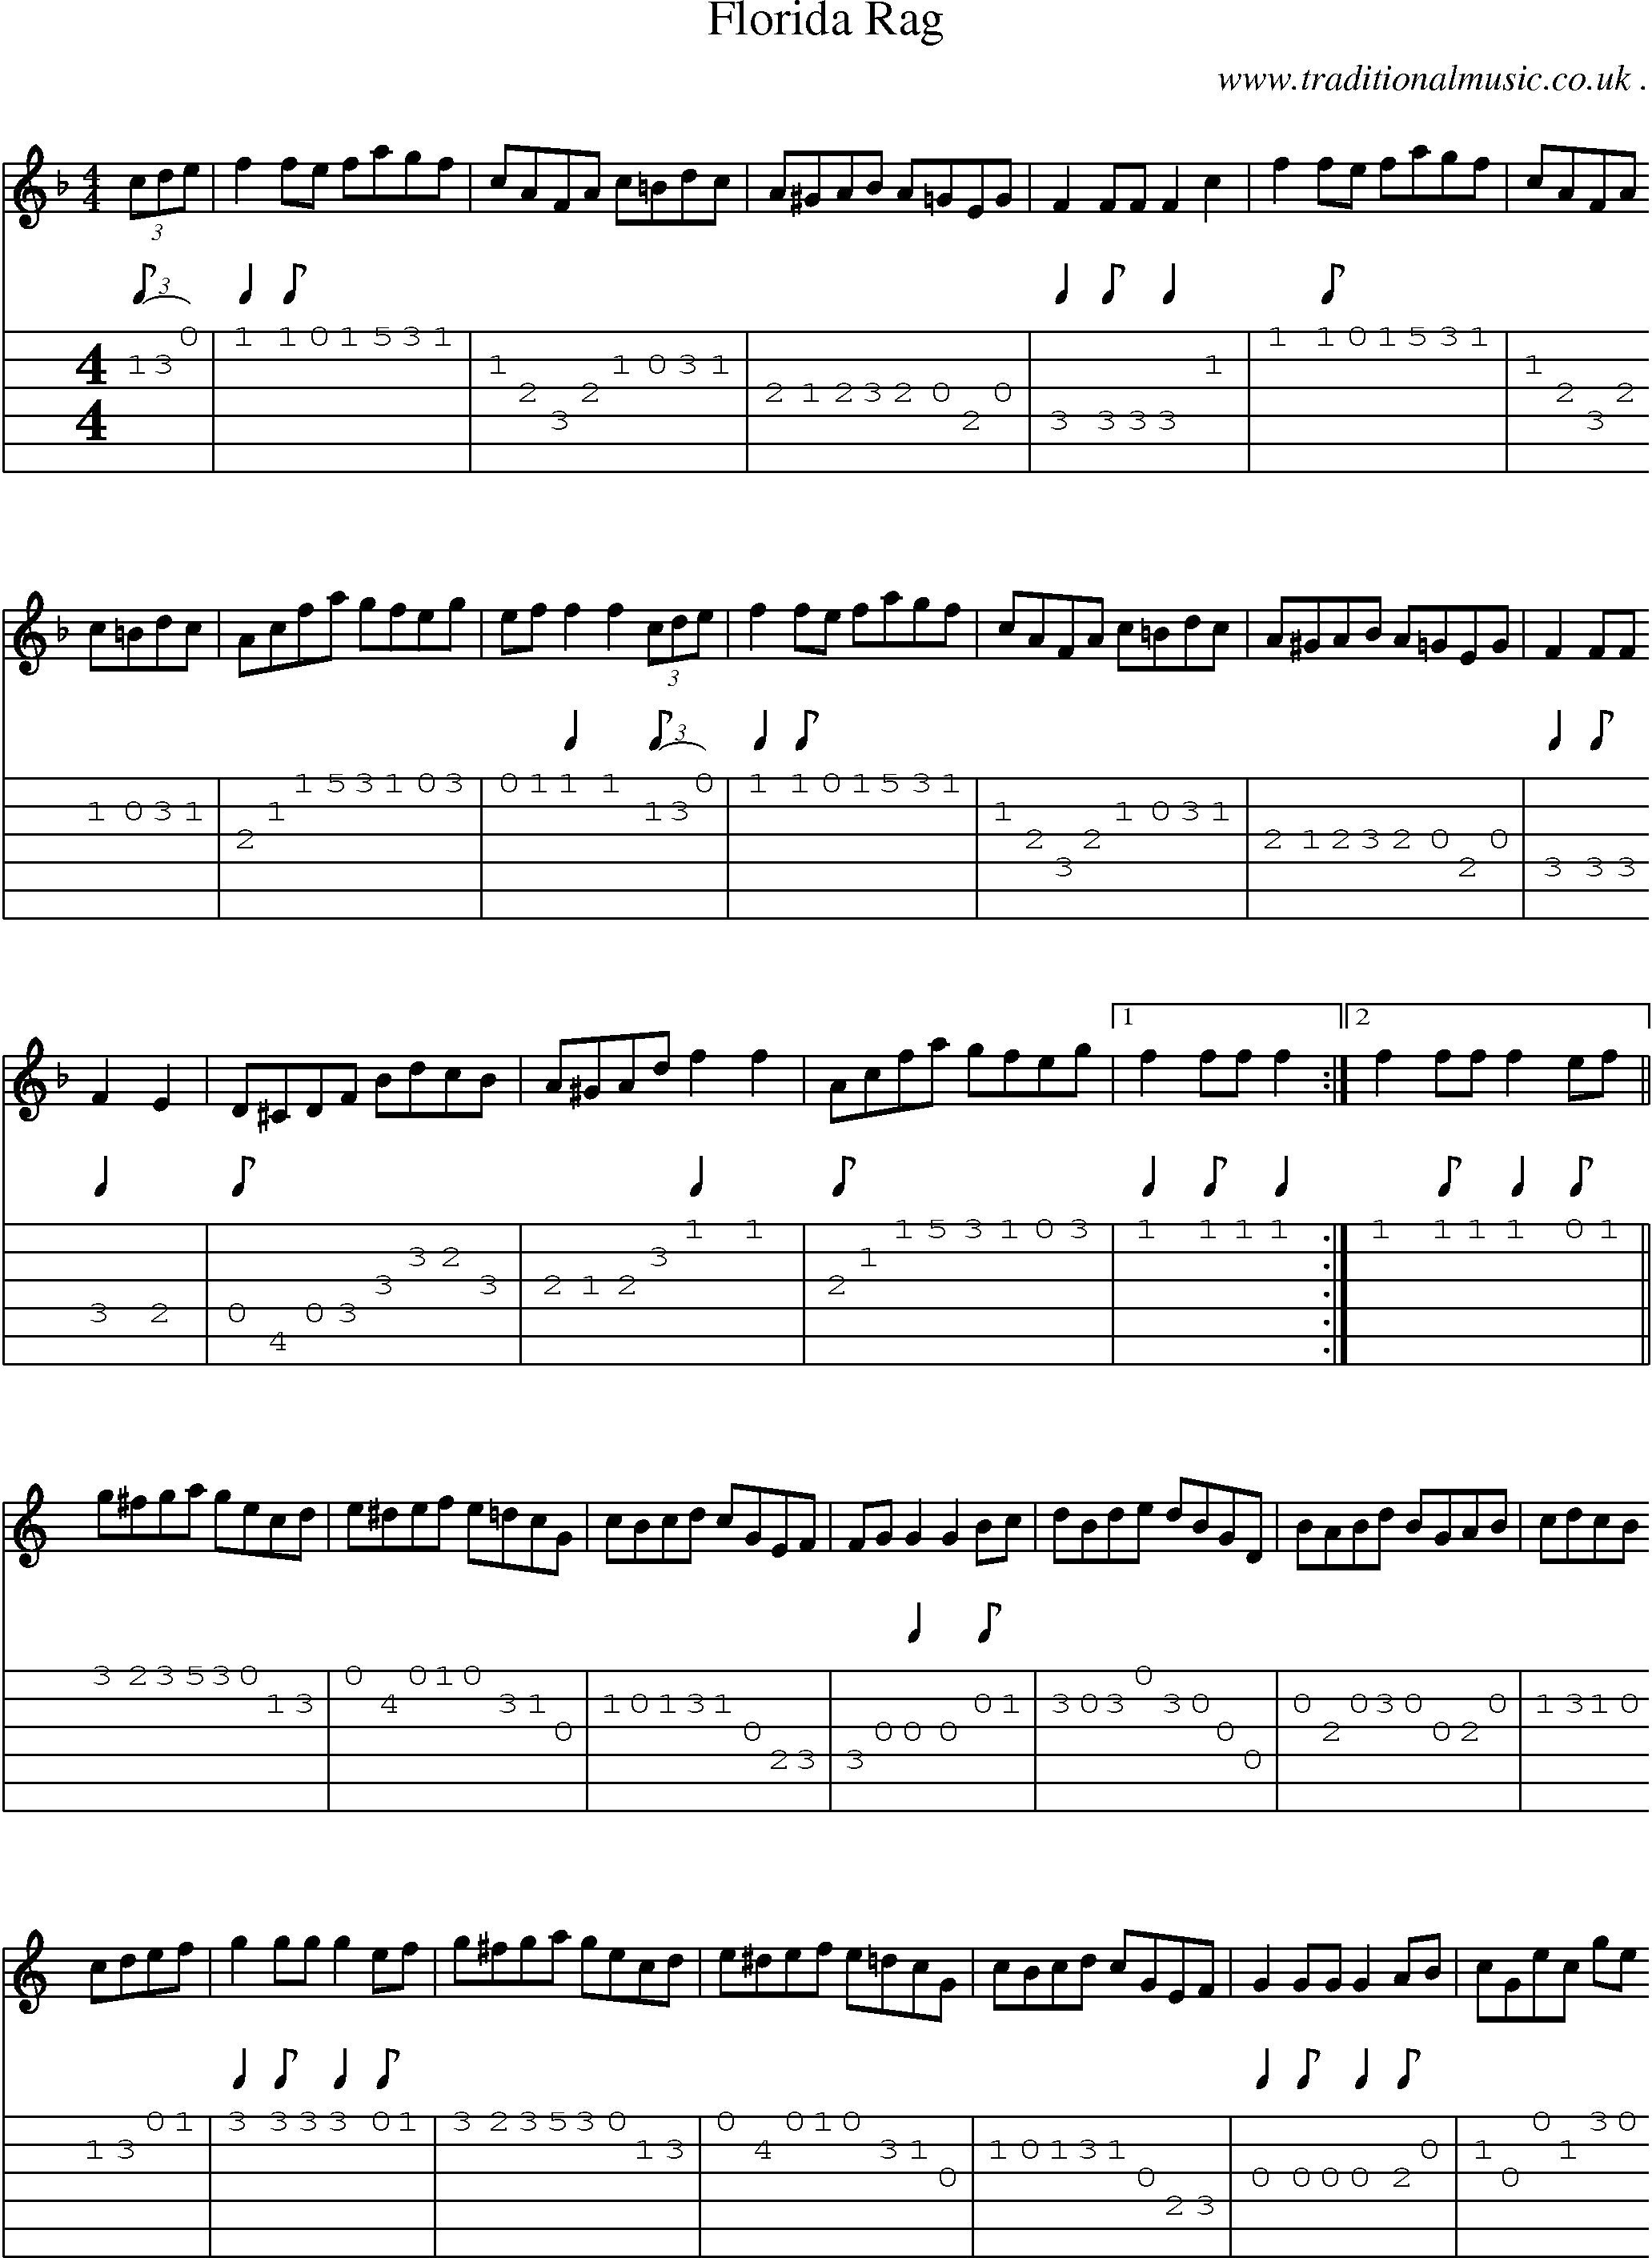 Music Score and Guitar Tabs for Florida Rag